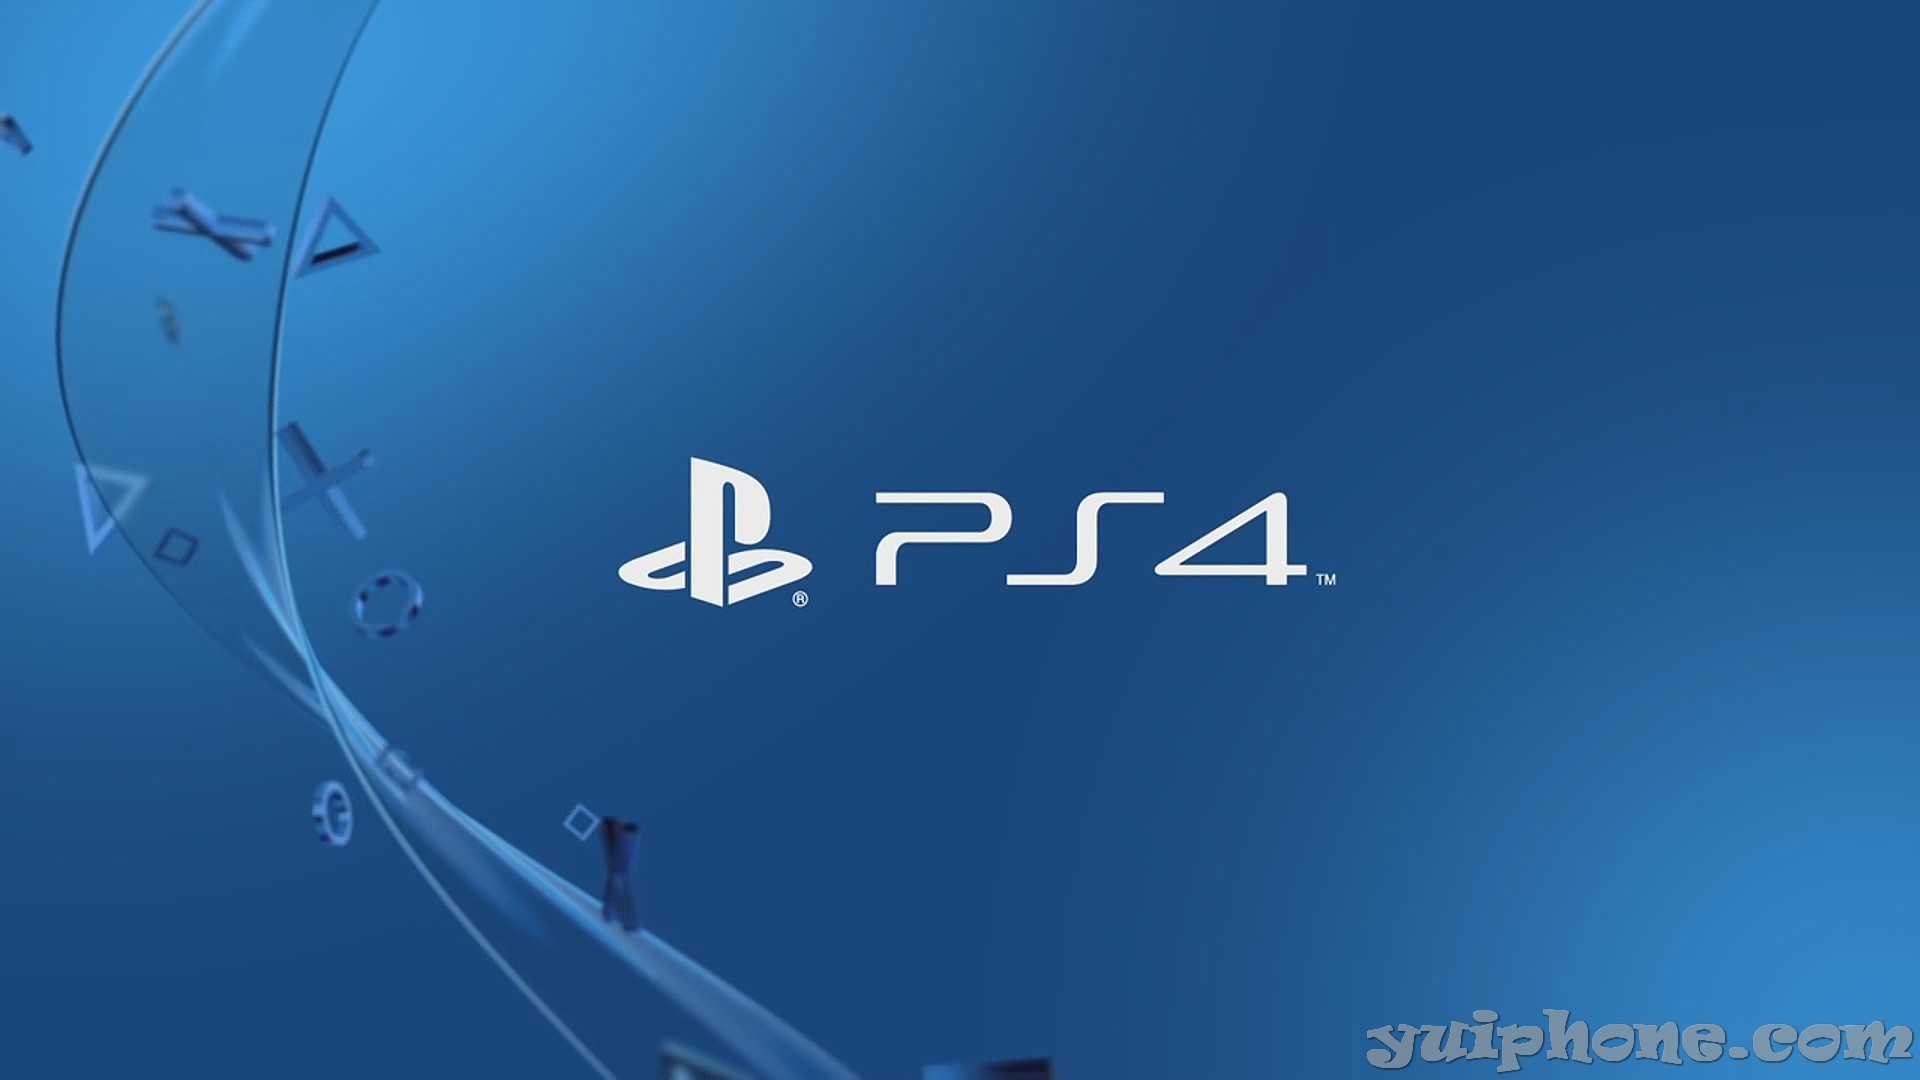 1920x1080 Images for Gt Playstation Wallpaper Blue px